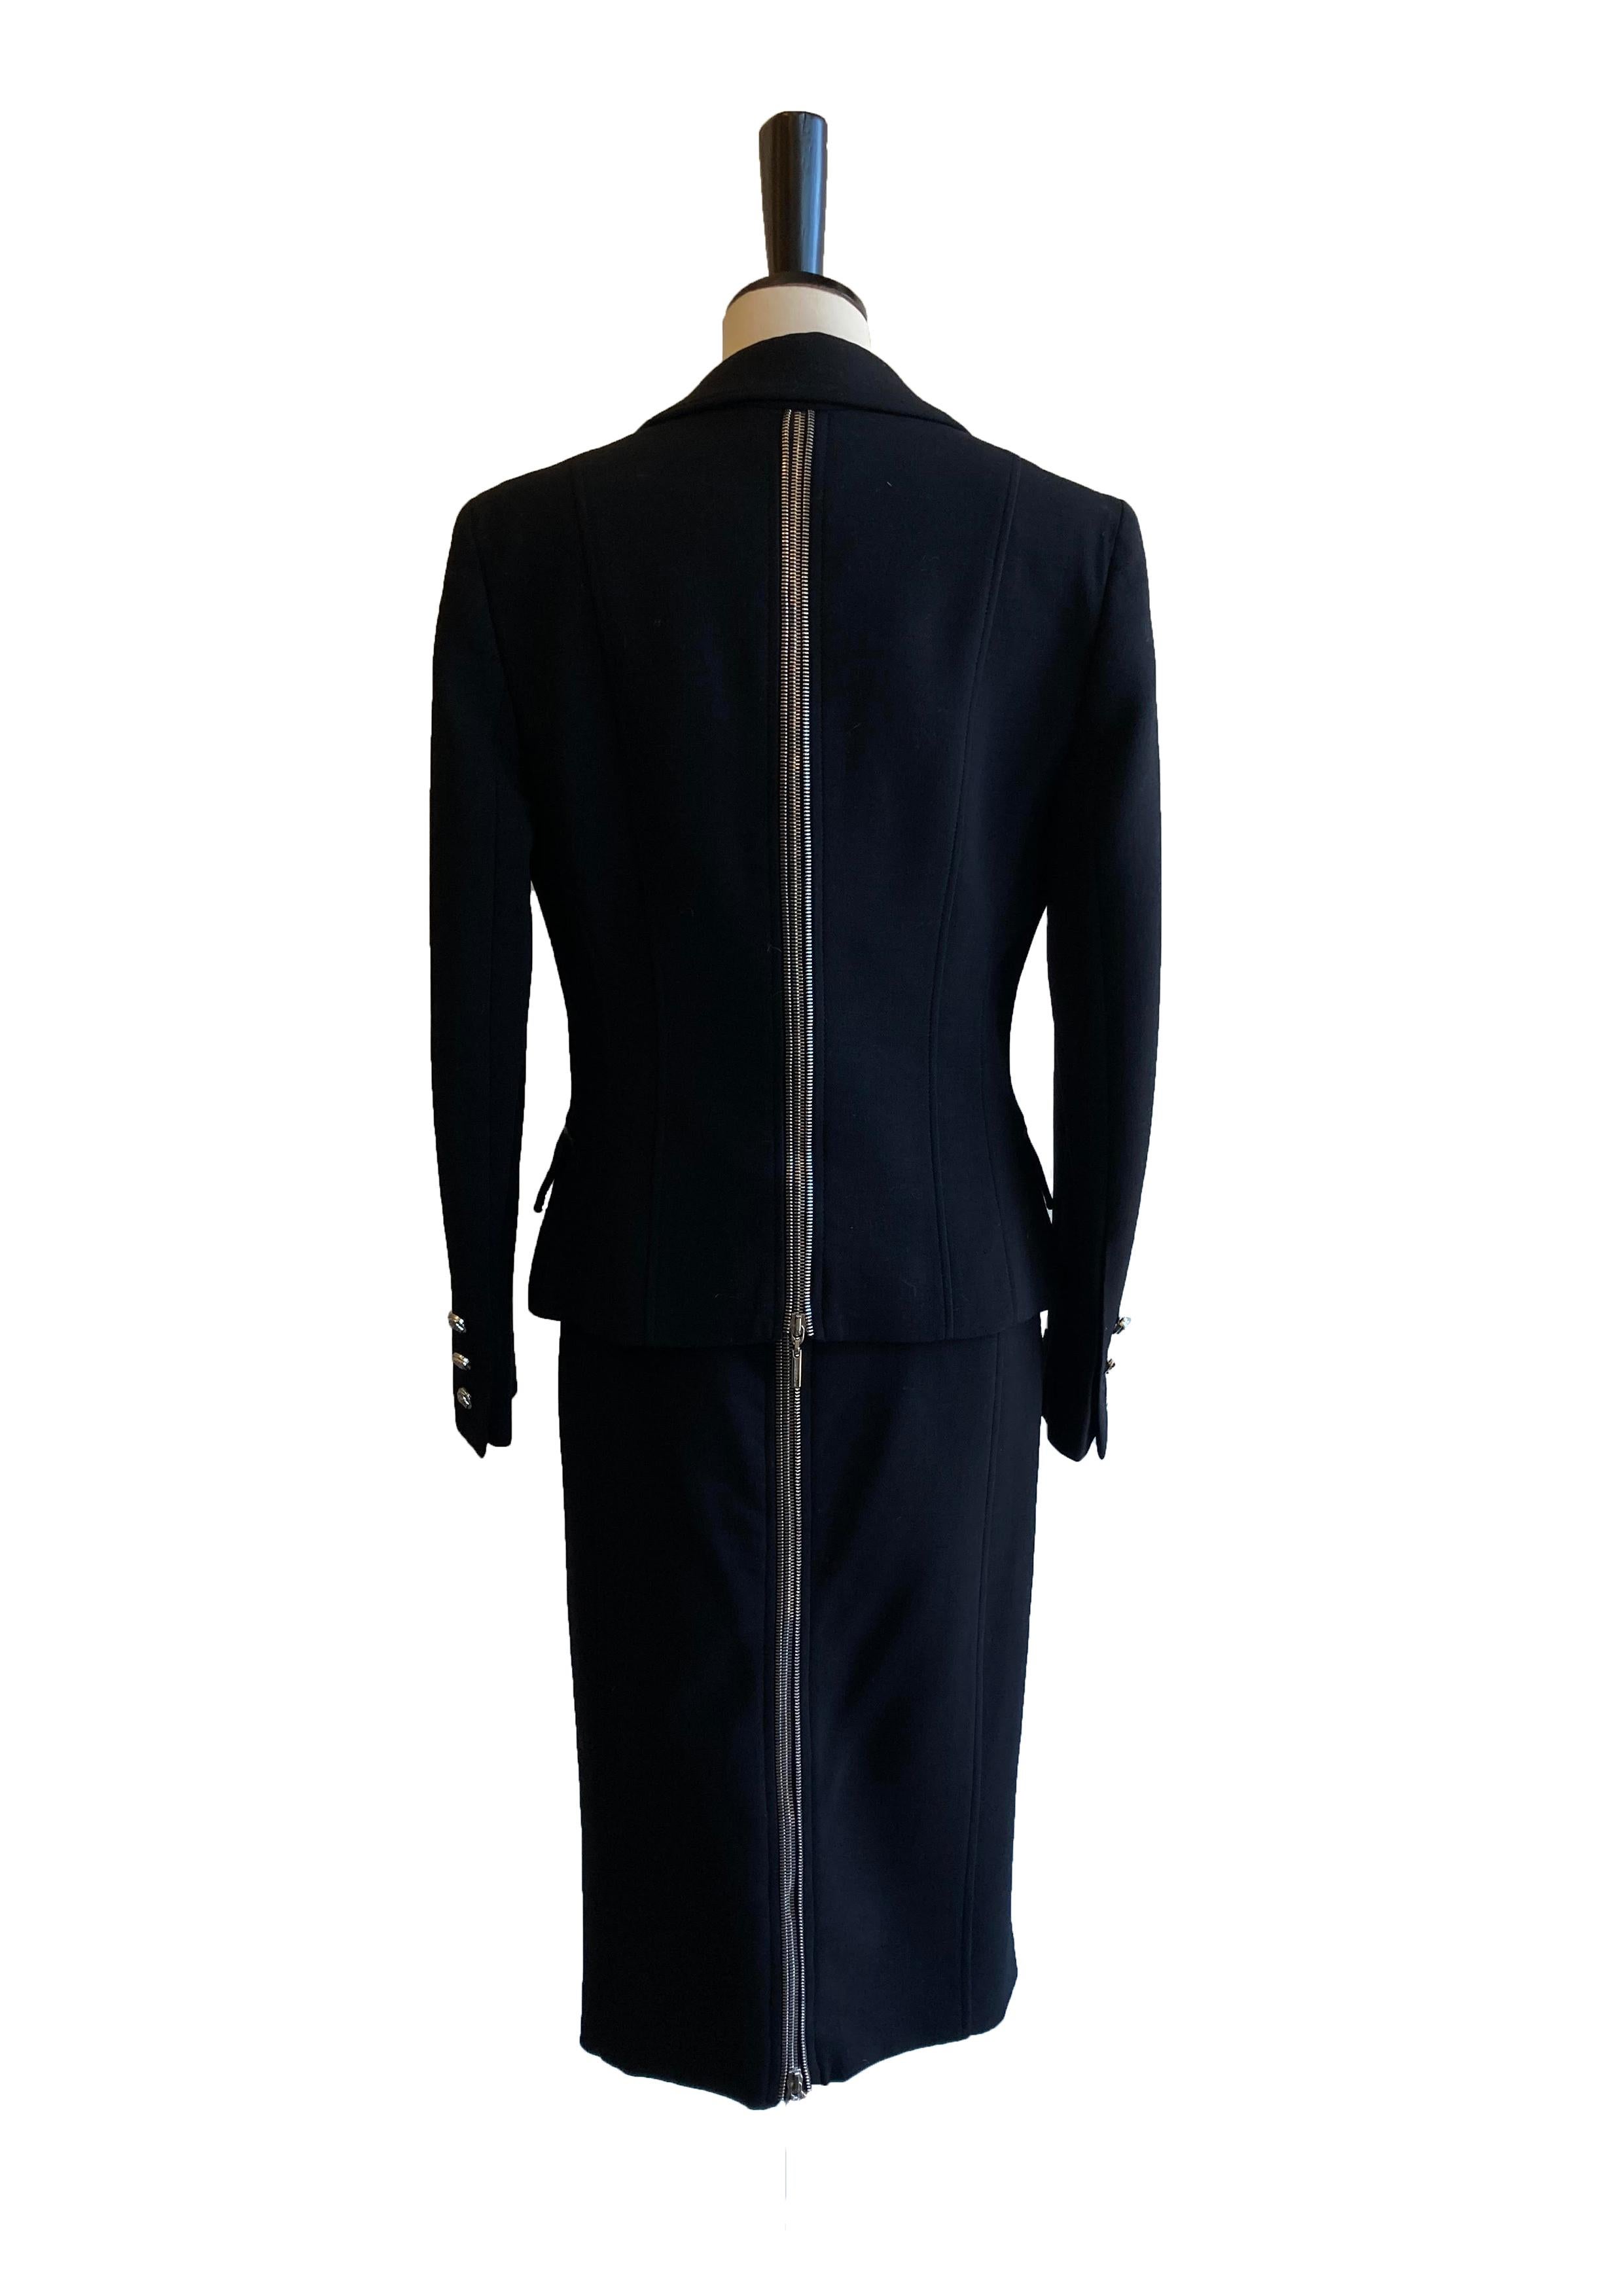 Vintage Gianni Versace skirt suit. Embellished with statement zip detail running all the way up the back. Jacket has lapels, paneling and flap over pockets with decorative zip detail. Single breasted and fastened with two silver toned buttons